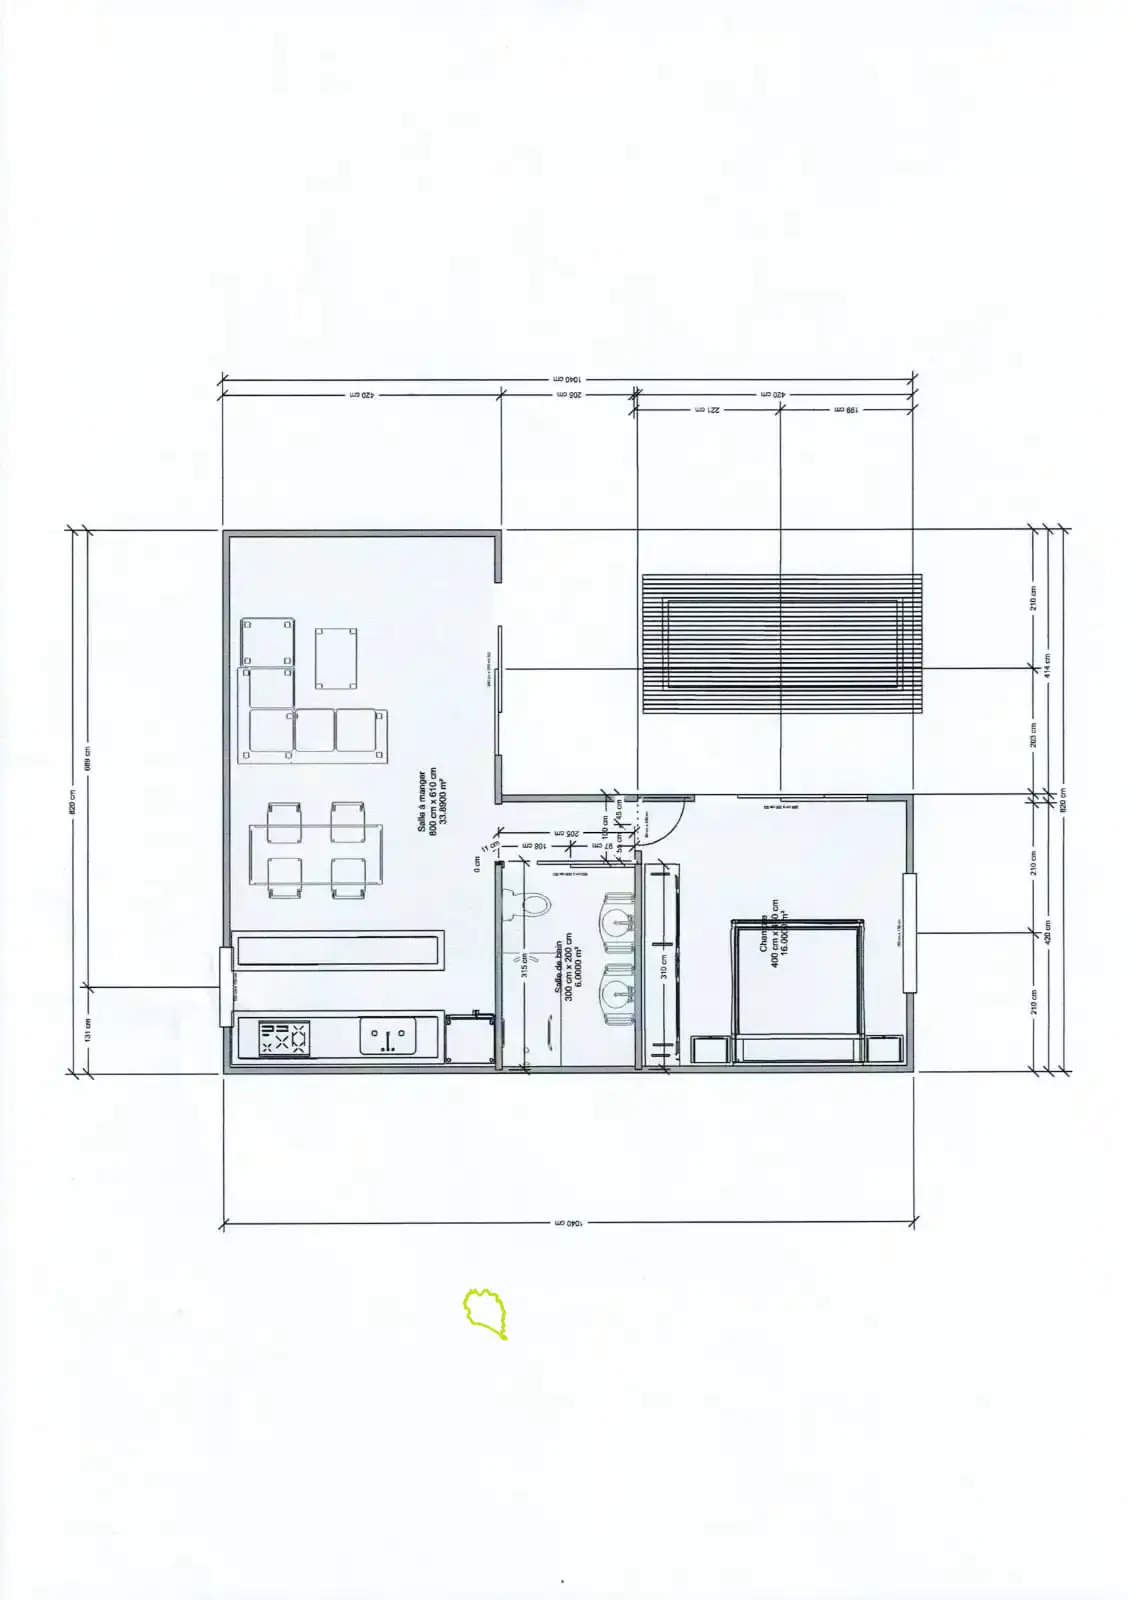 Chaweng noi, 1 bedroom villa, purchase off plan, ideal investor